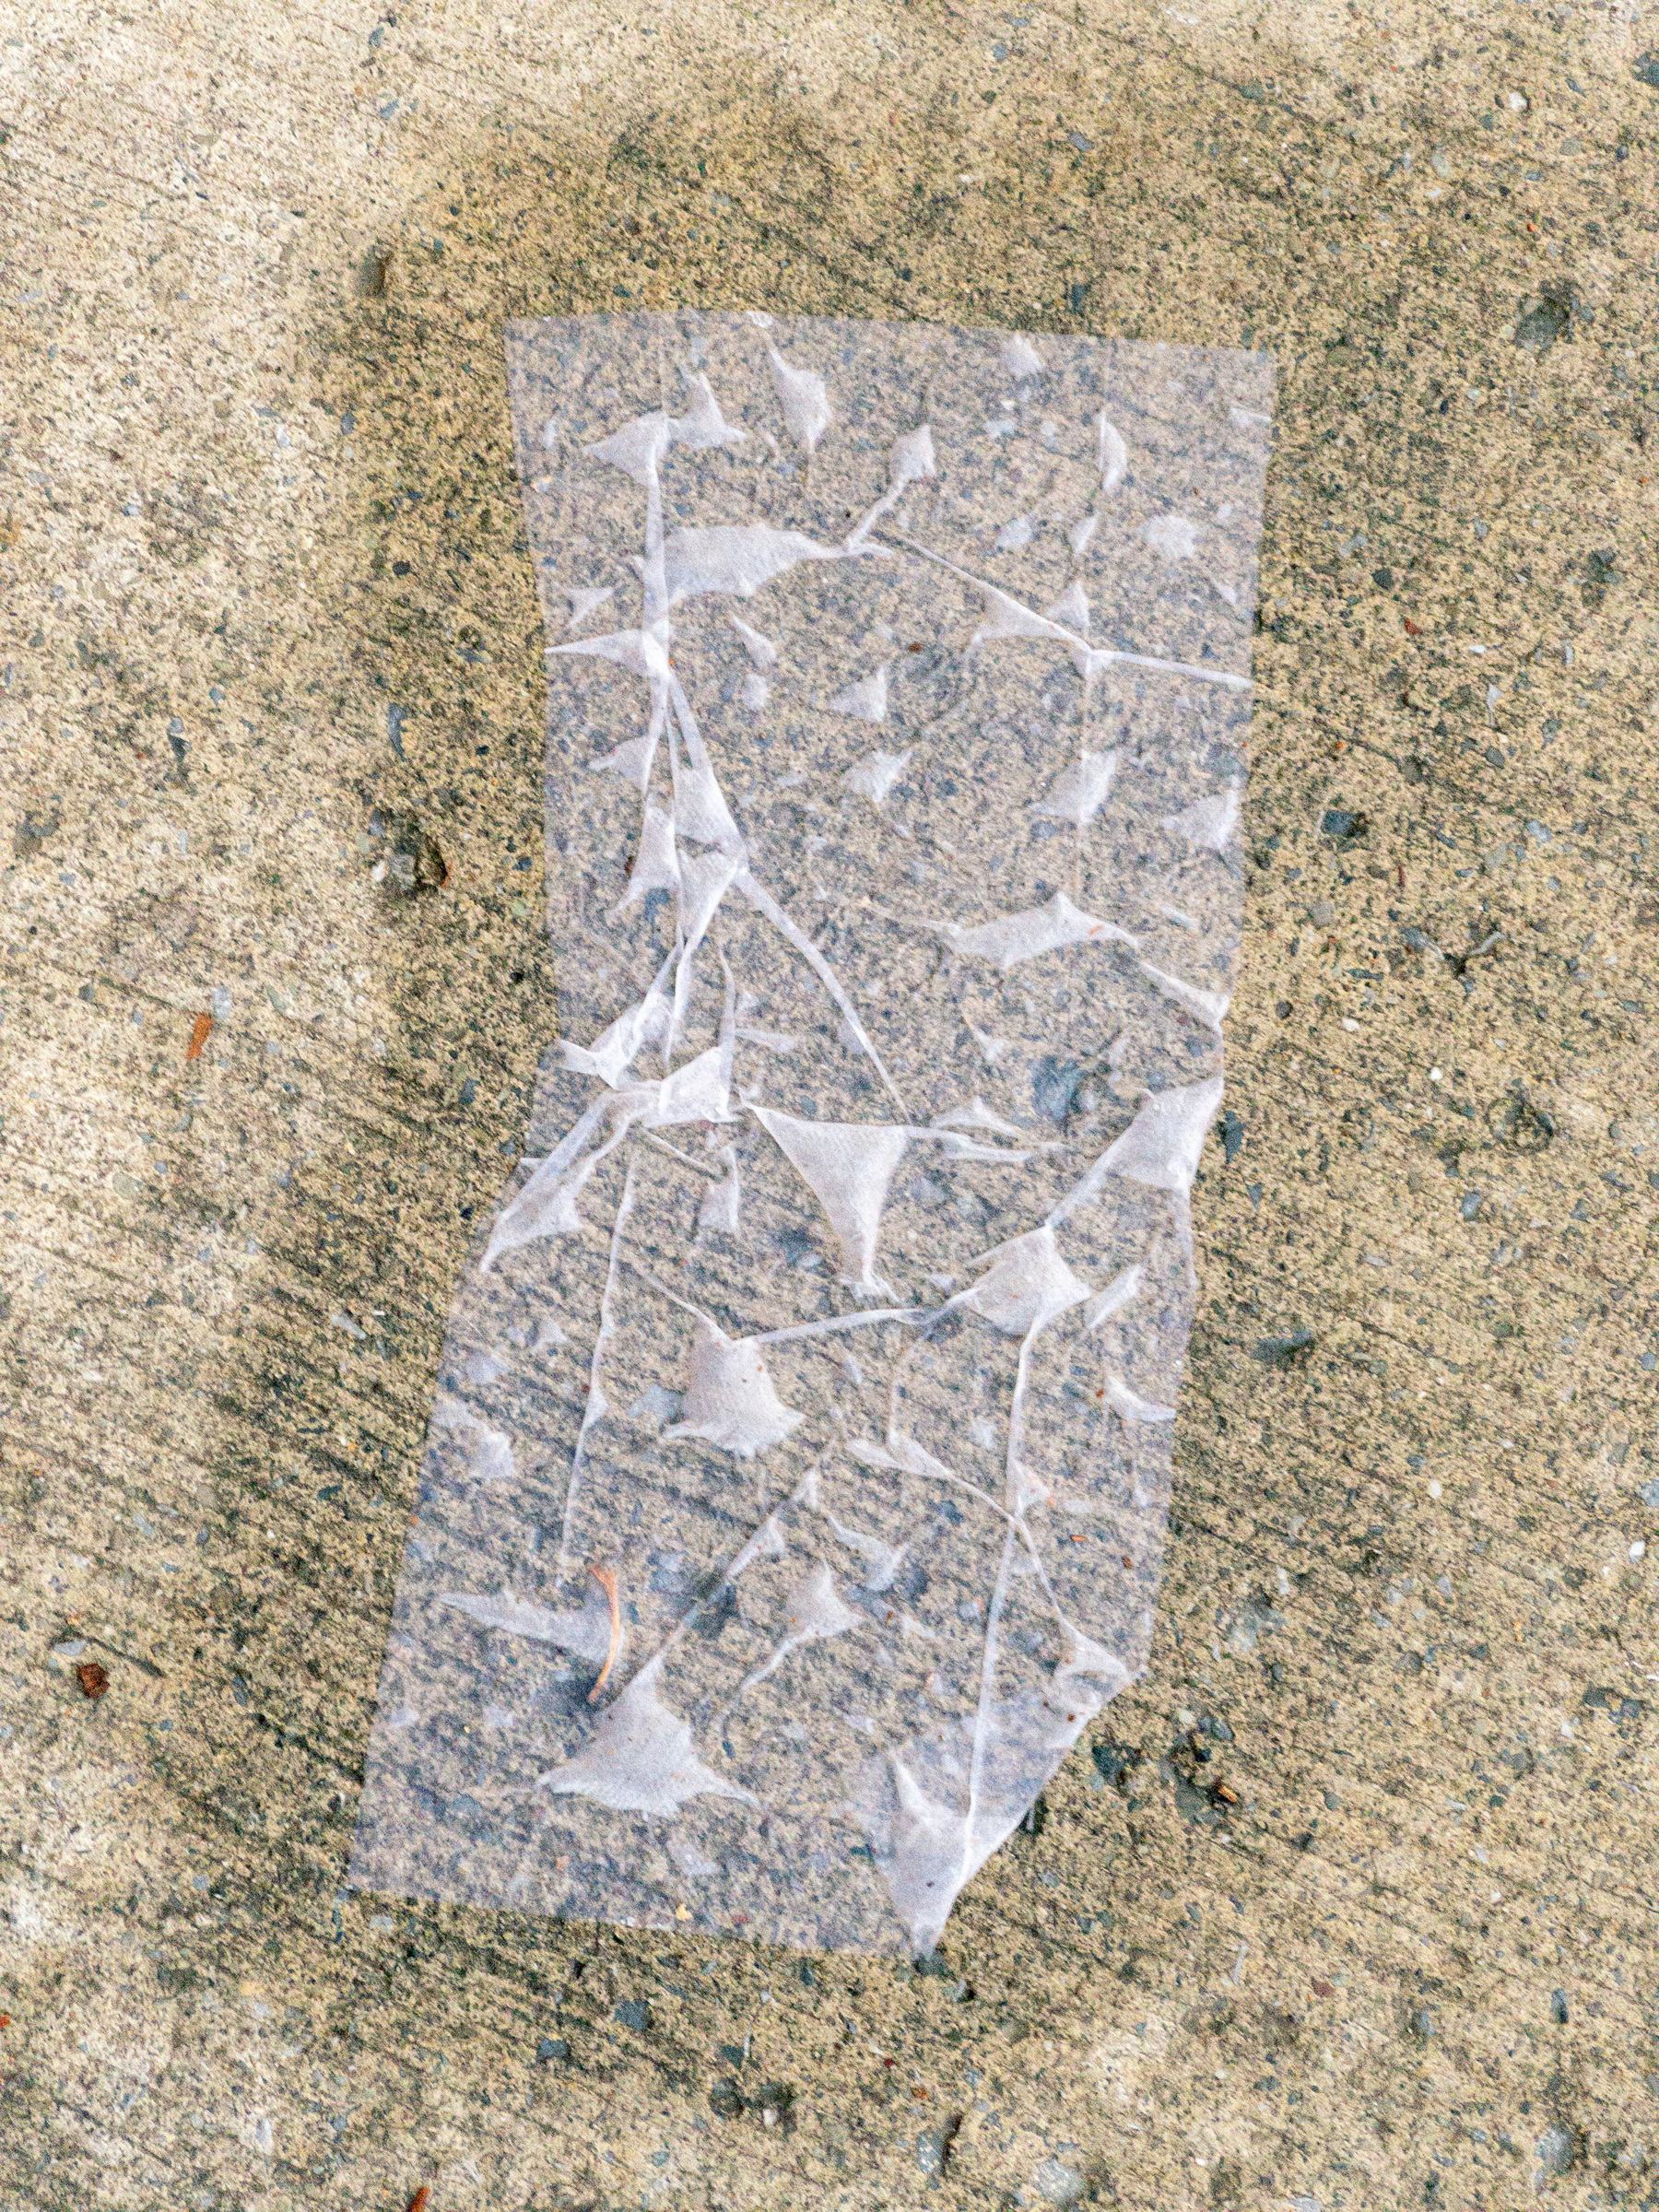 wet tissue paper on concrete sidewalk with a freeform pattern made by air pockets under the paper and looking a little like neurons